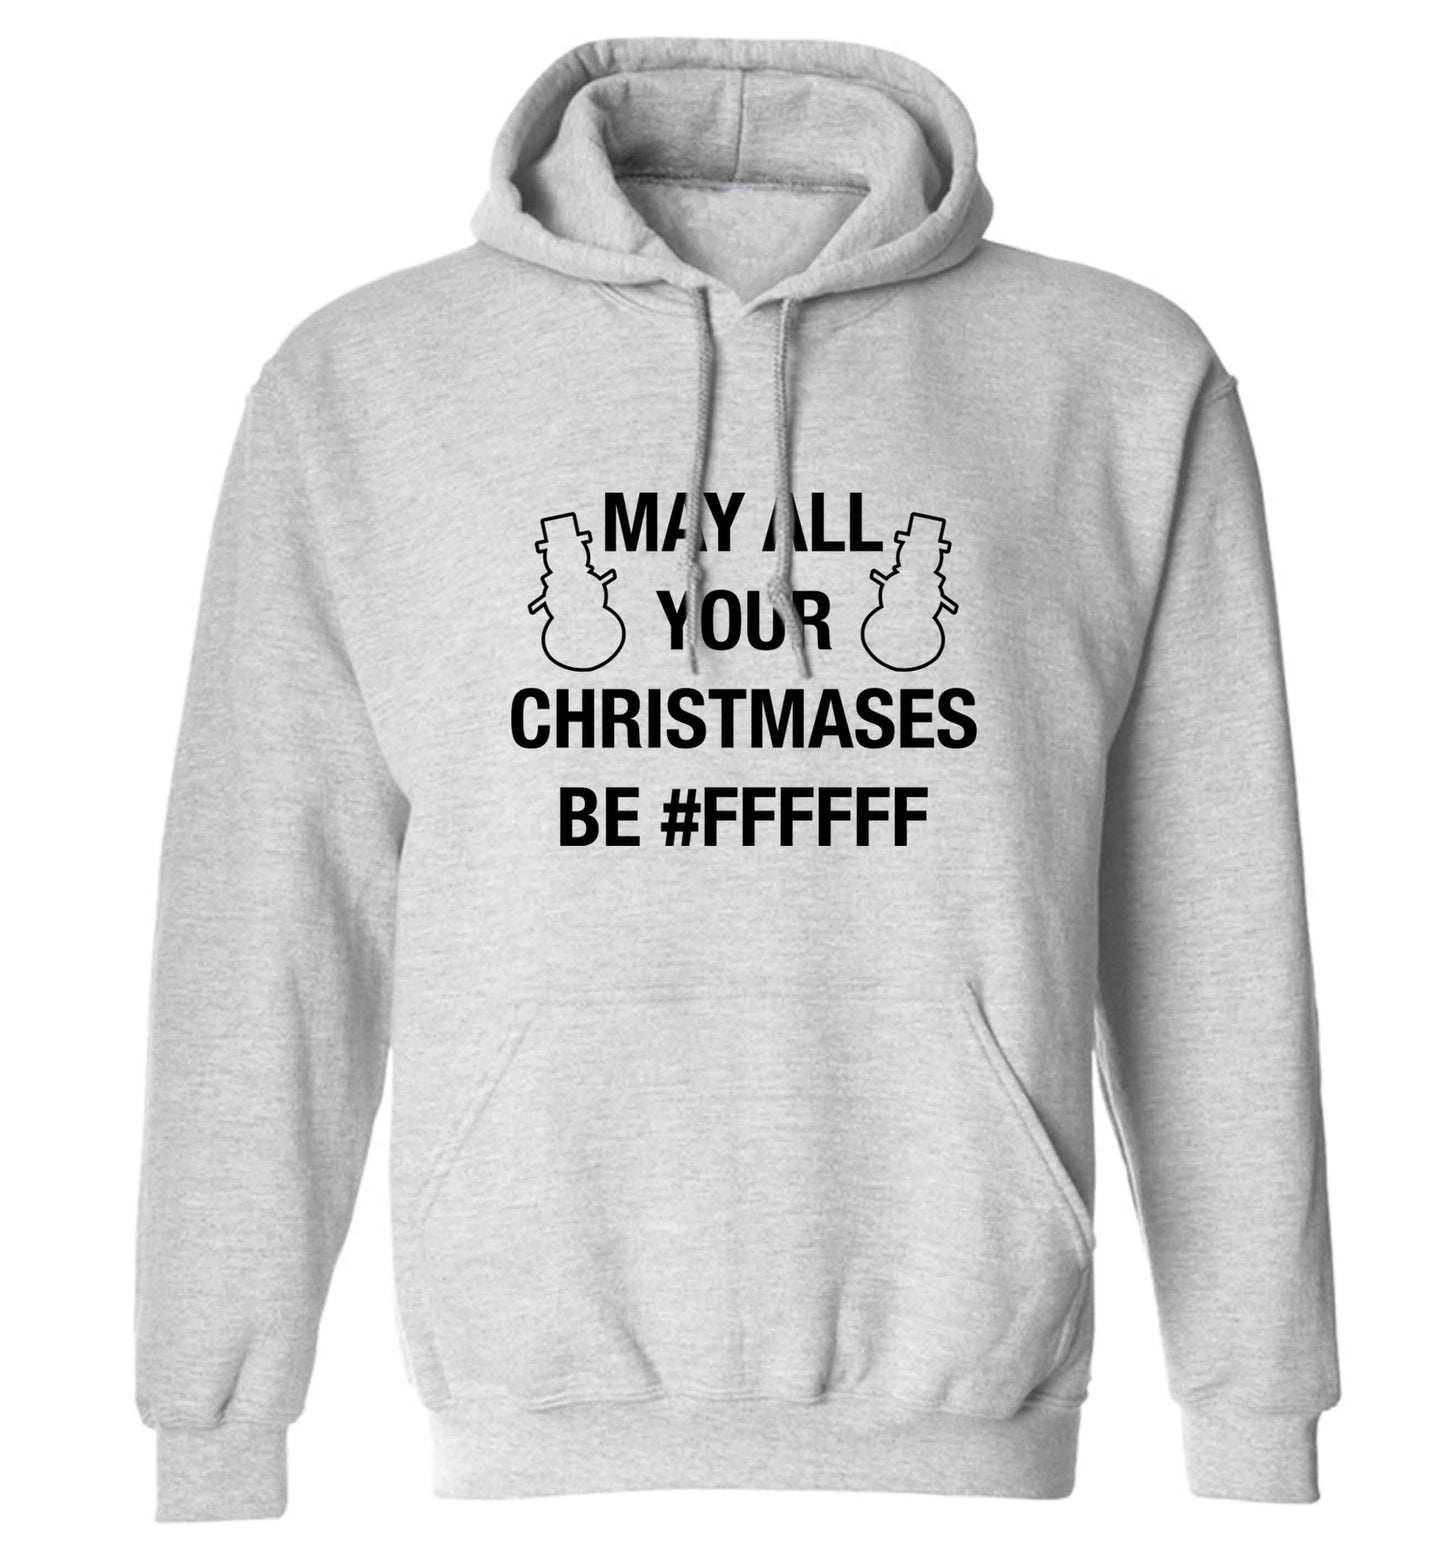 May all your Christmases be #FFFFFF adults unisex grey hoodie 2XL